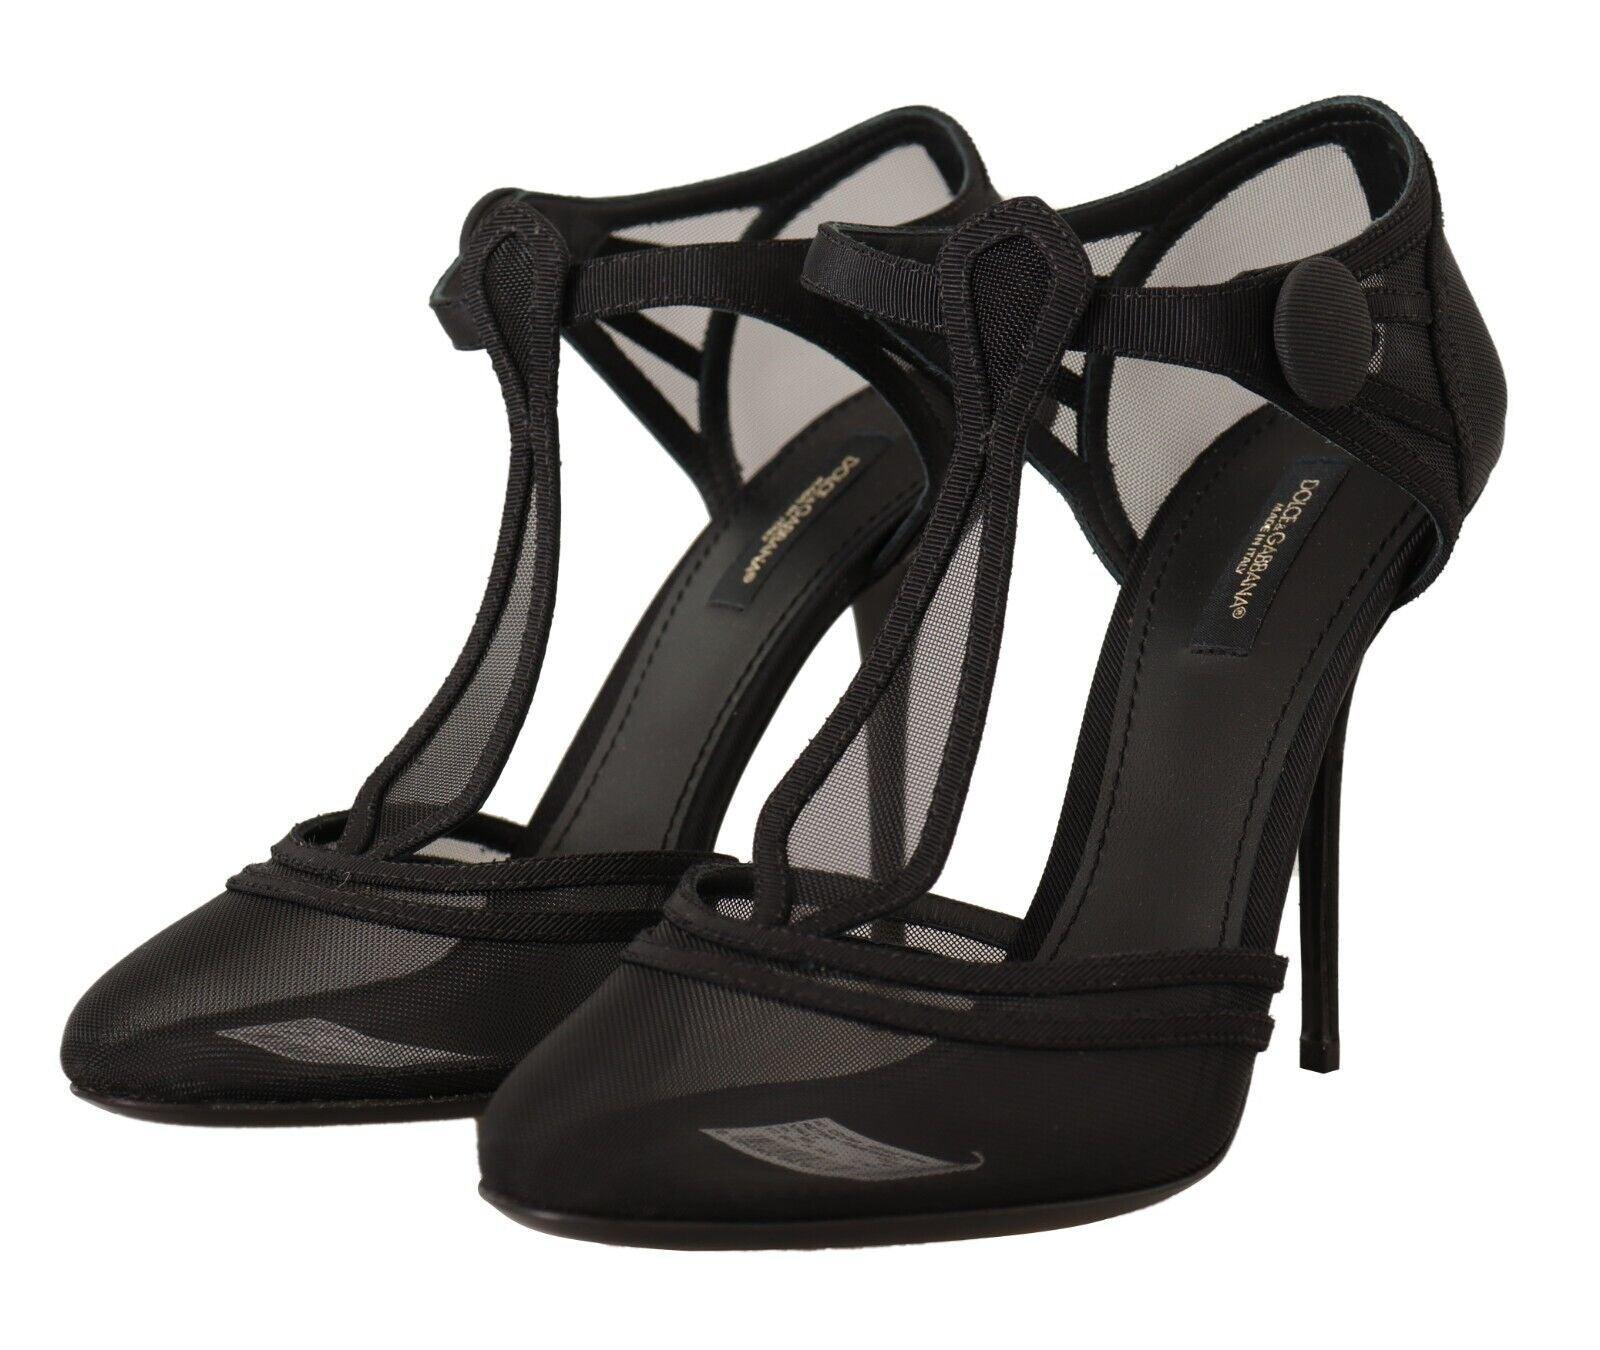 Dolce & Gabbana Black Mesh T-strap Stiletto Heels Pumps Shoes - Designed by Dolce & Gabbana Available to Buy at a Discounted Price on Moon Behind The Hill Online Designer Discount Store